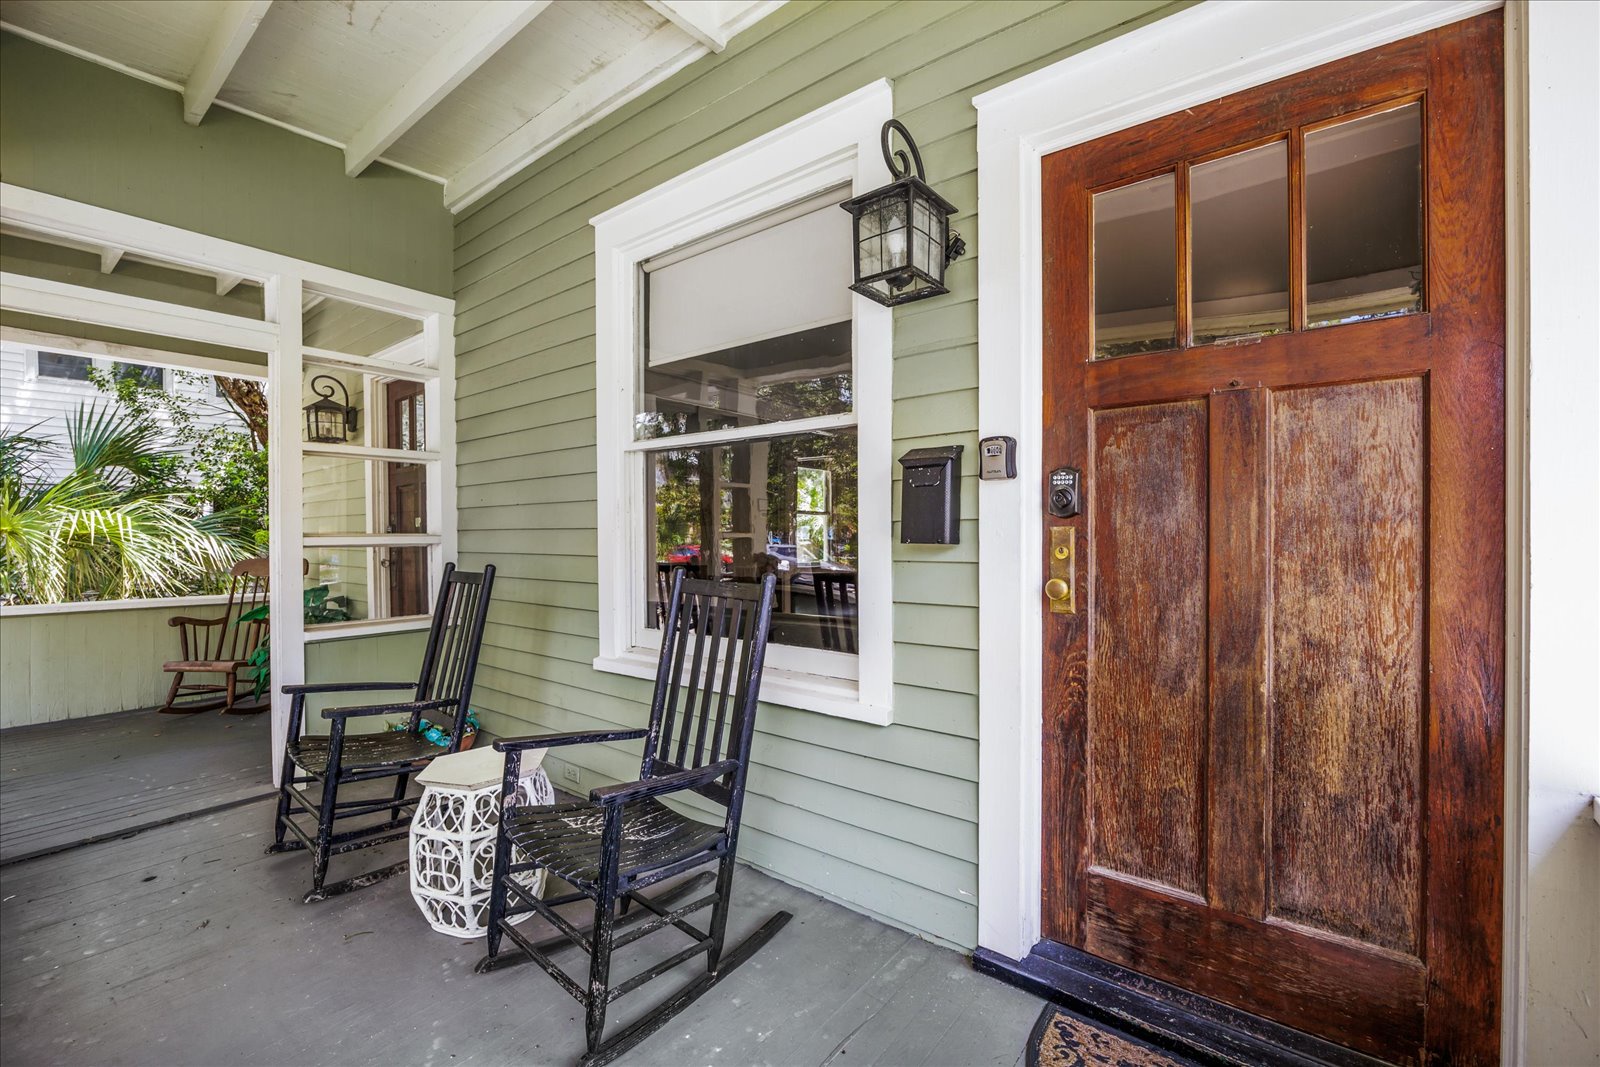 Take in the fresh air on this ground-level condo’s front porch